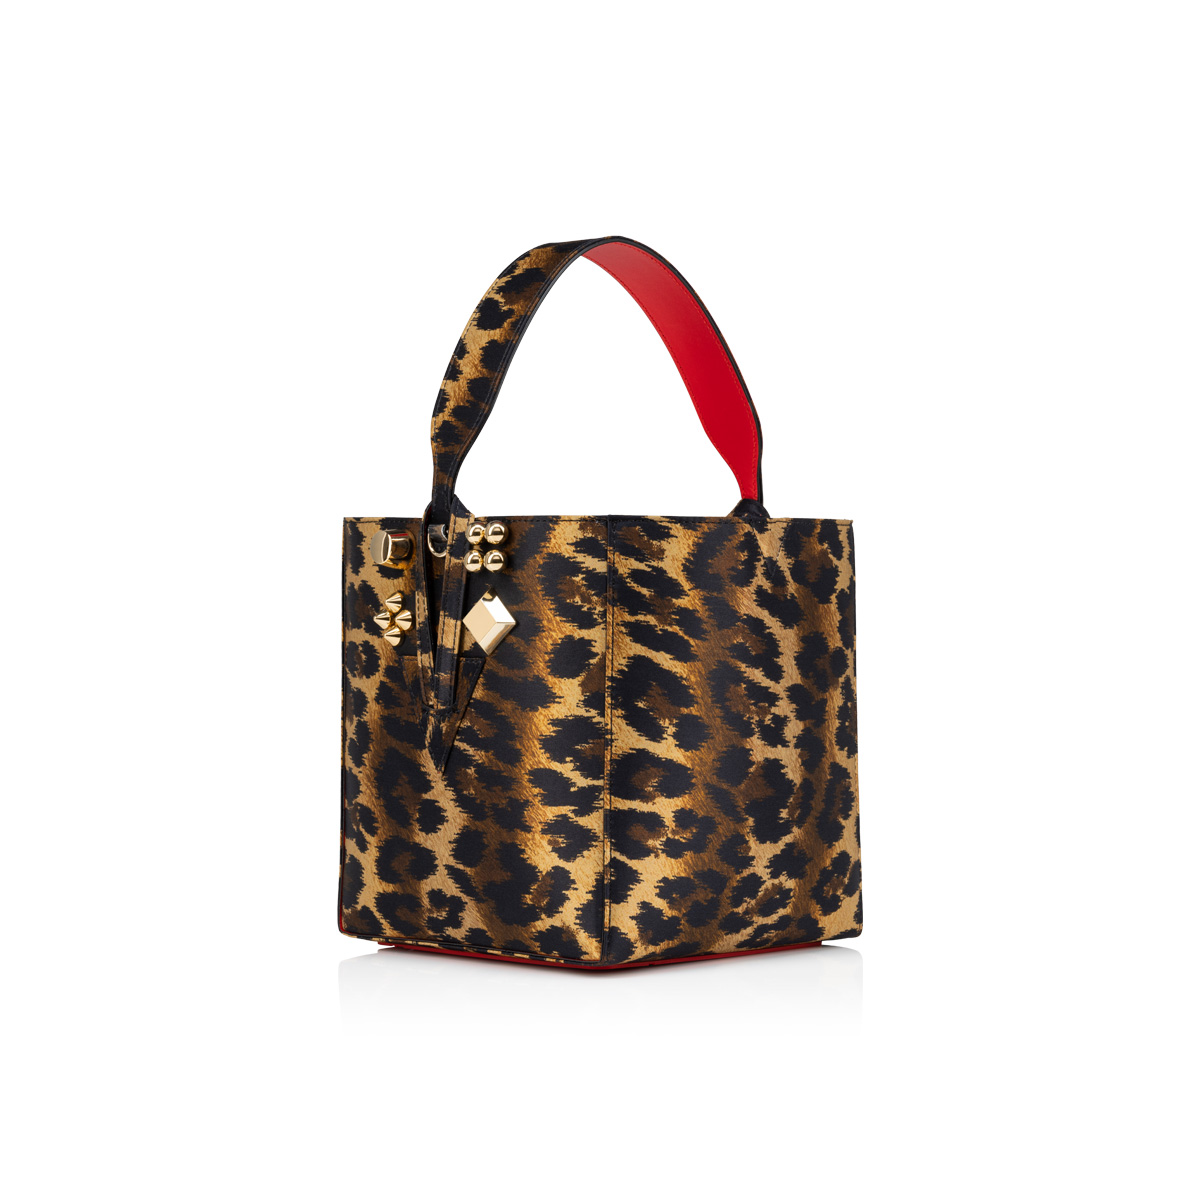 Cabachic Small Leopard Print Tote Bag in Multicoloured - Christian Louboutin